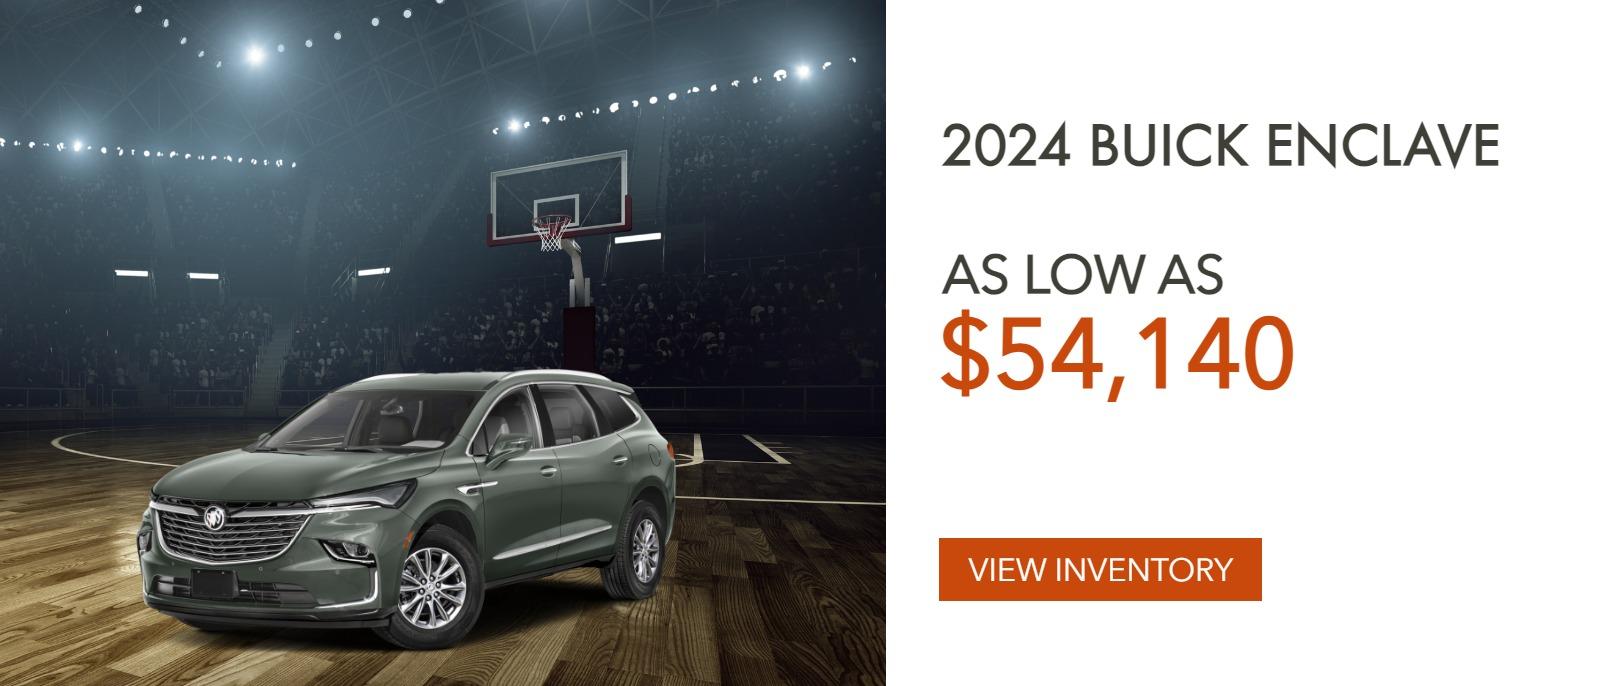 2024 Buick Enclave as low as $54,140